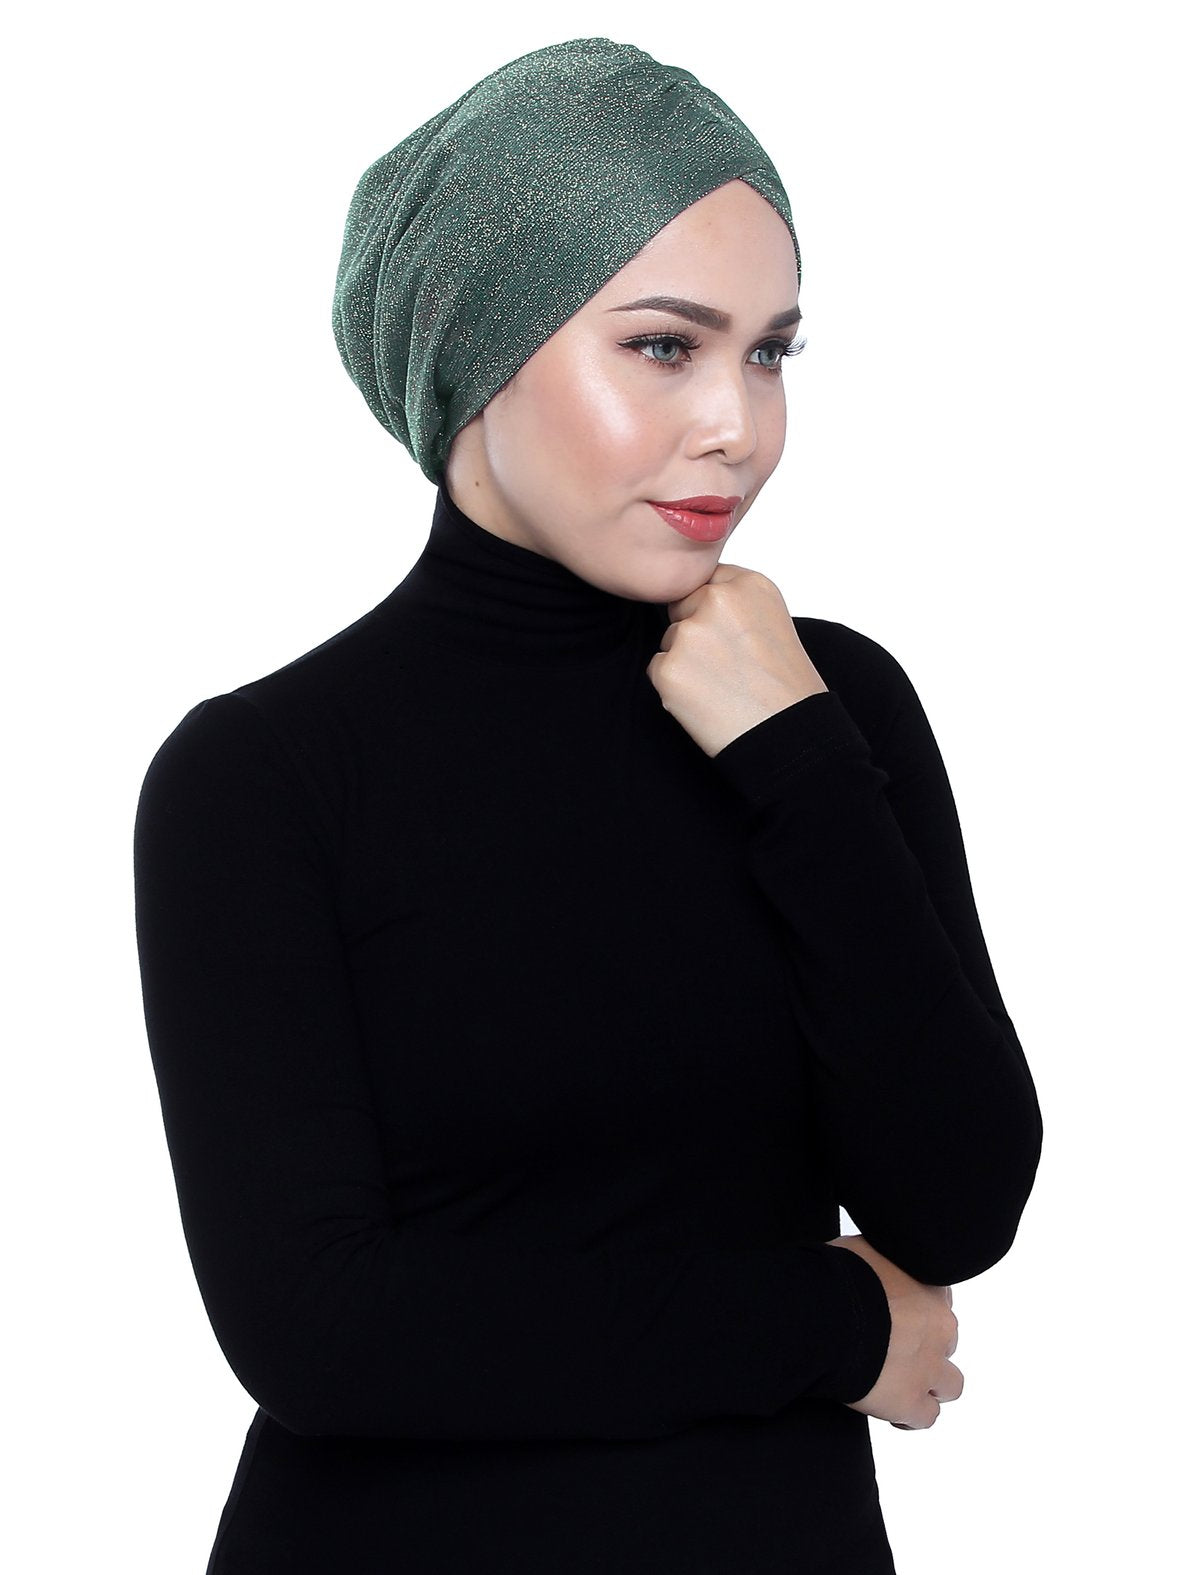 Gold Knit Turban - HEDGE GREEN - Third Culture Boutique